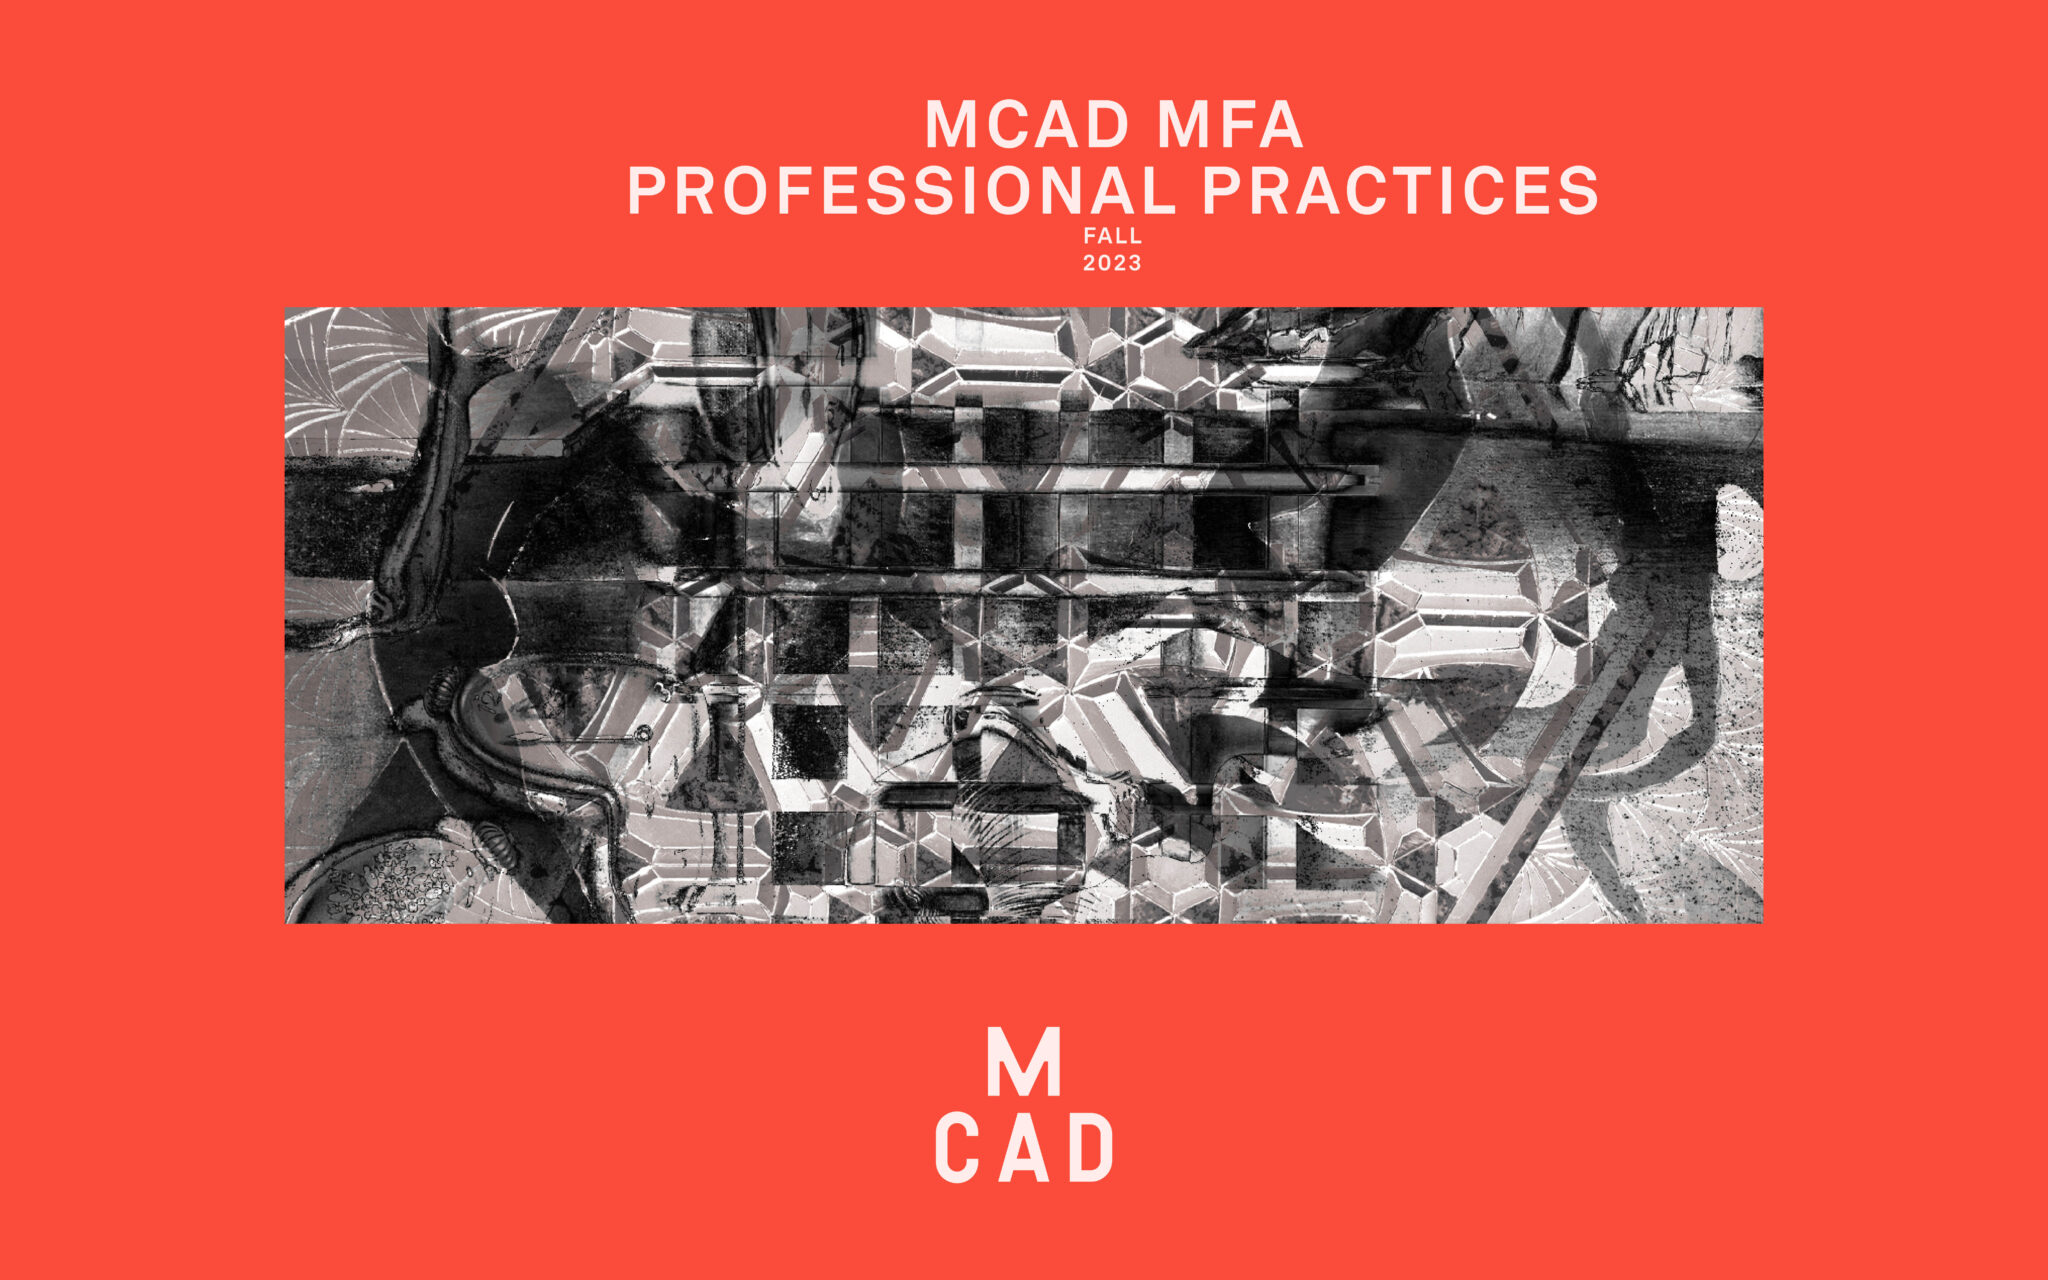 MCAD MFA Professional Practices Events Fall 23